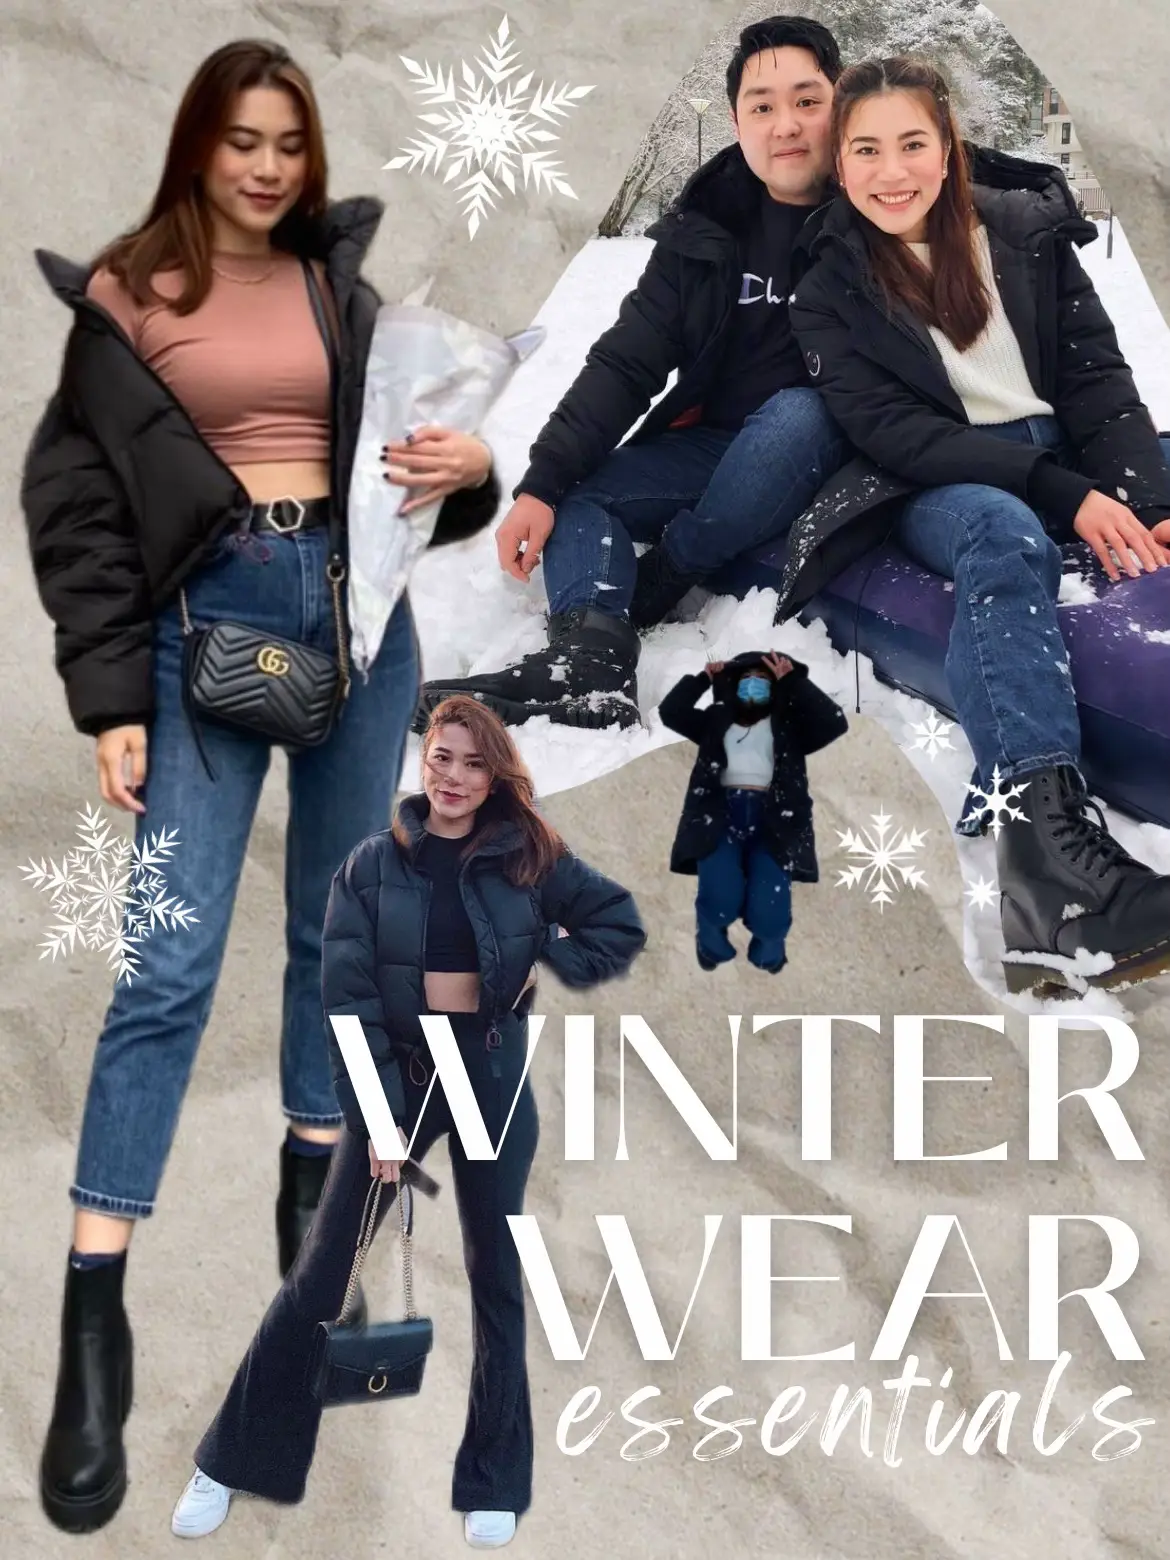 15 ways to survive a Canadian Winter ⋆ chic everywhere  Cold weather outfits  winter, Winter outfits women, Street style outfits winter